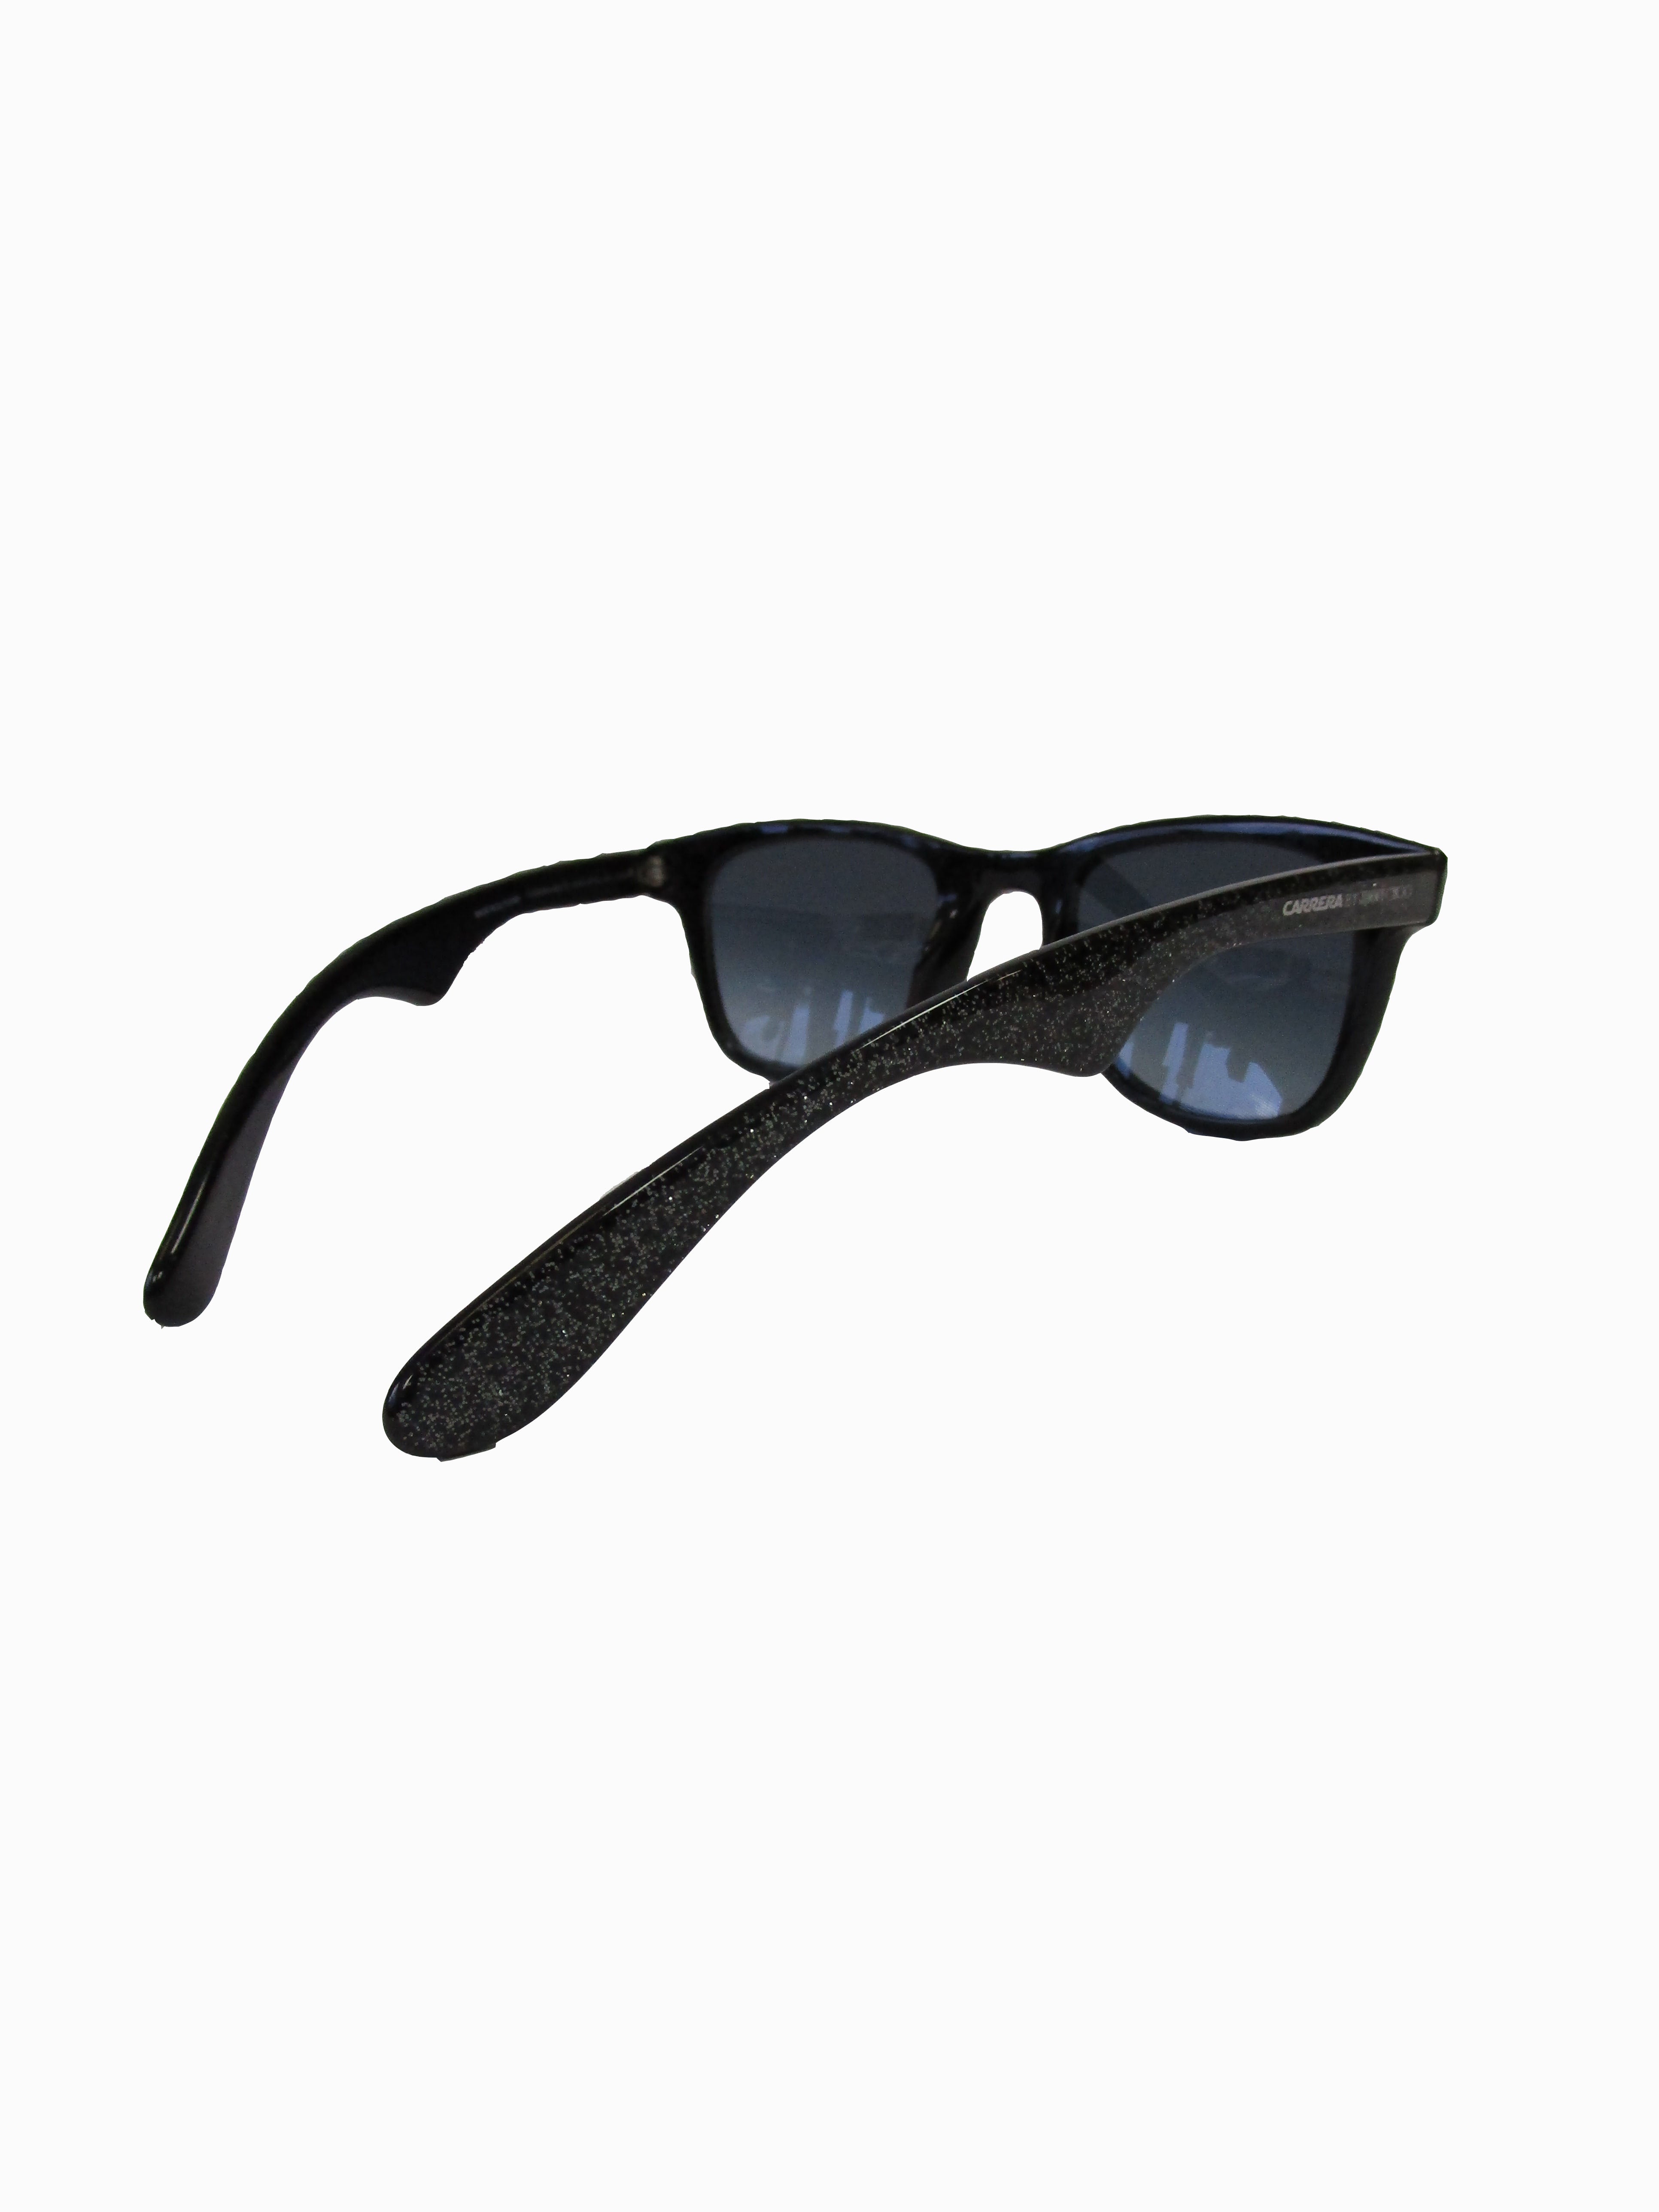 Jimmy Choo for Carrera Black Sparkled Framed Optyl Sunglasses - MRS Couture